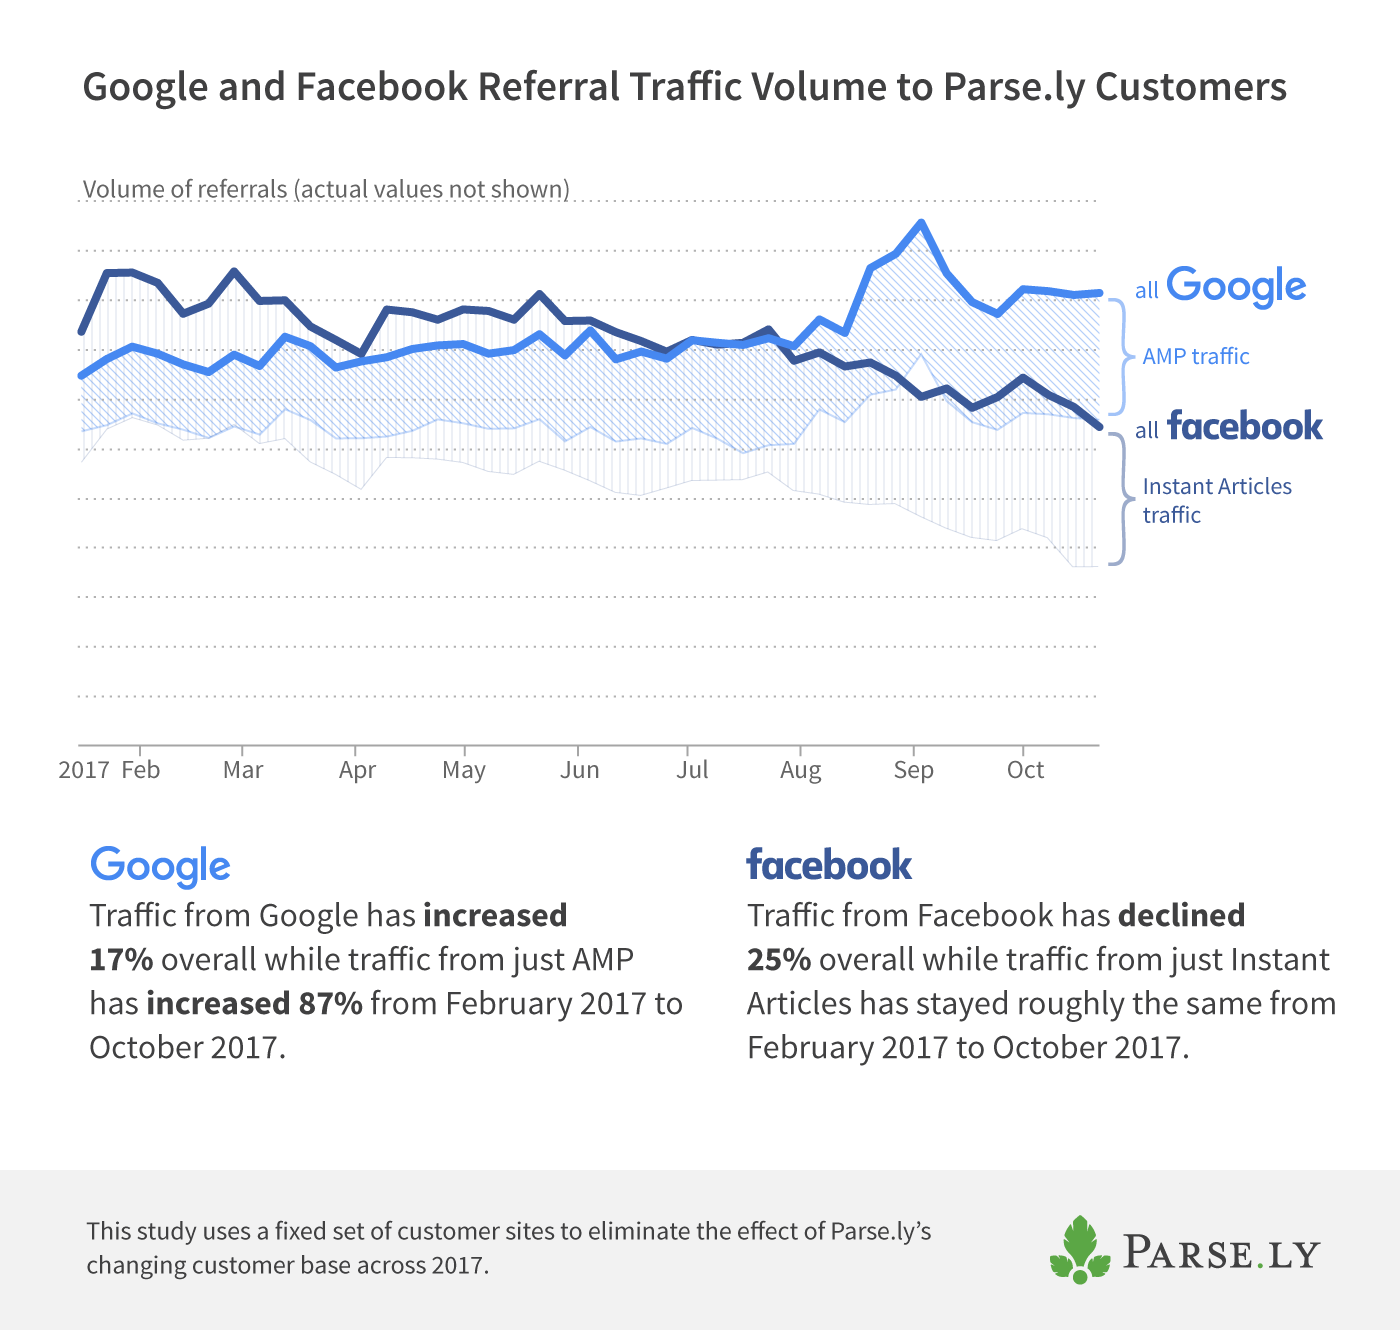 Google and Facebook referral traffic volume